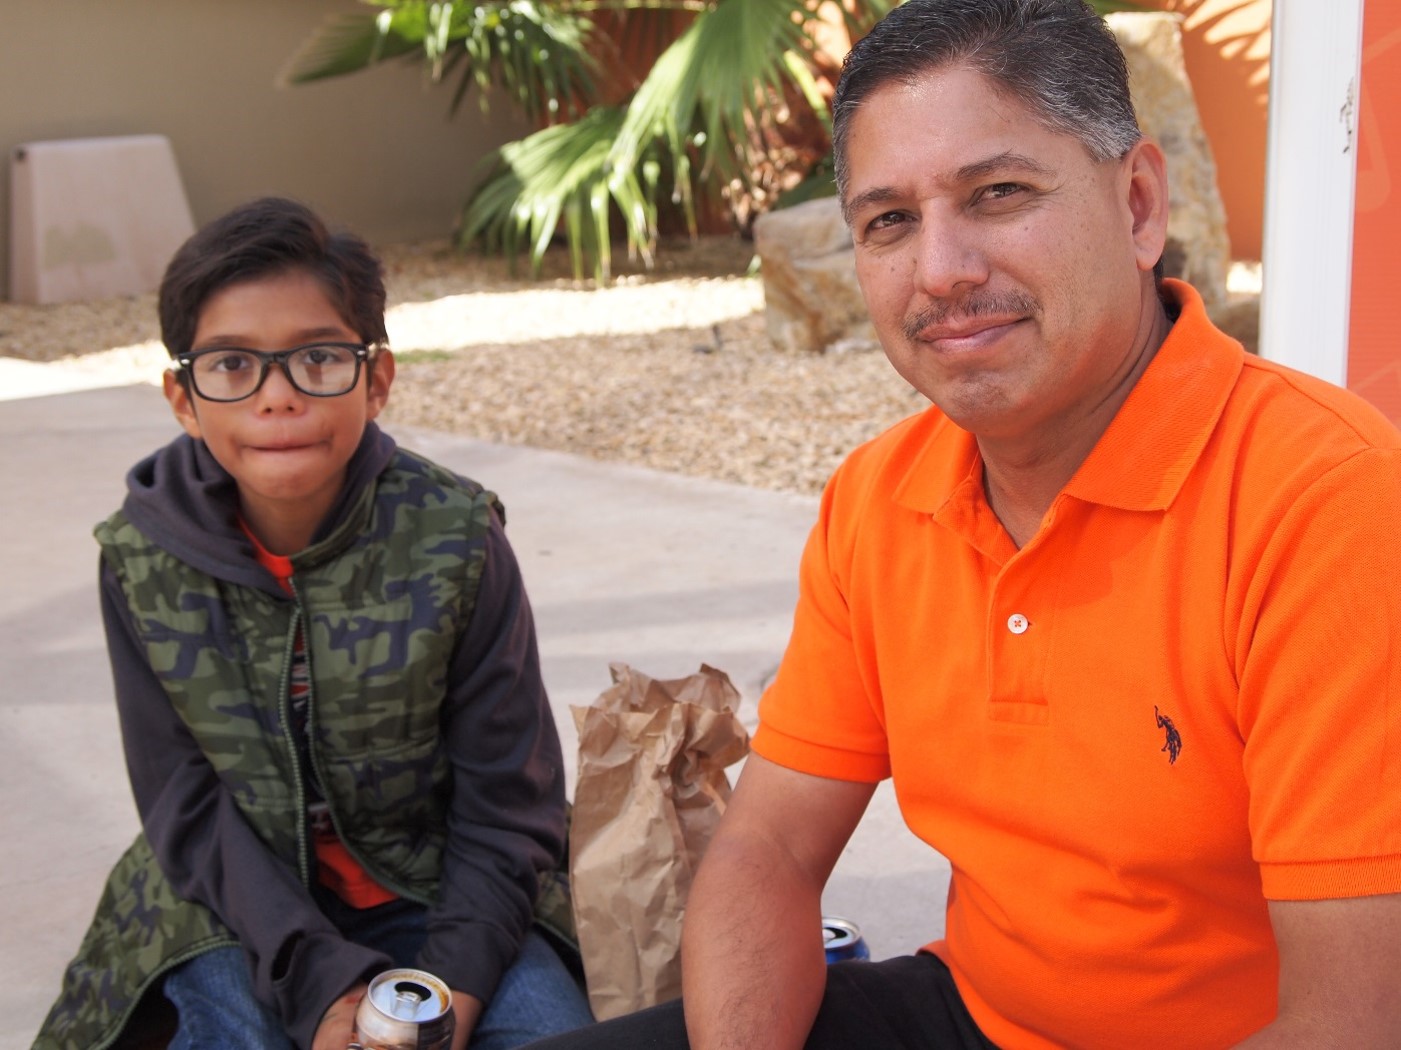 Father and Son at one of our program events